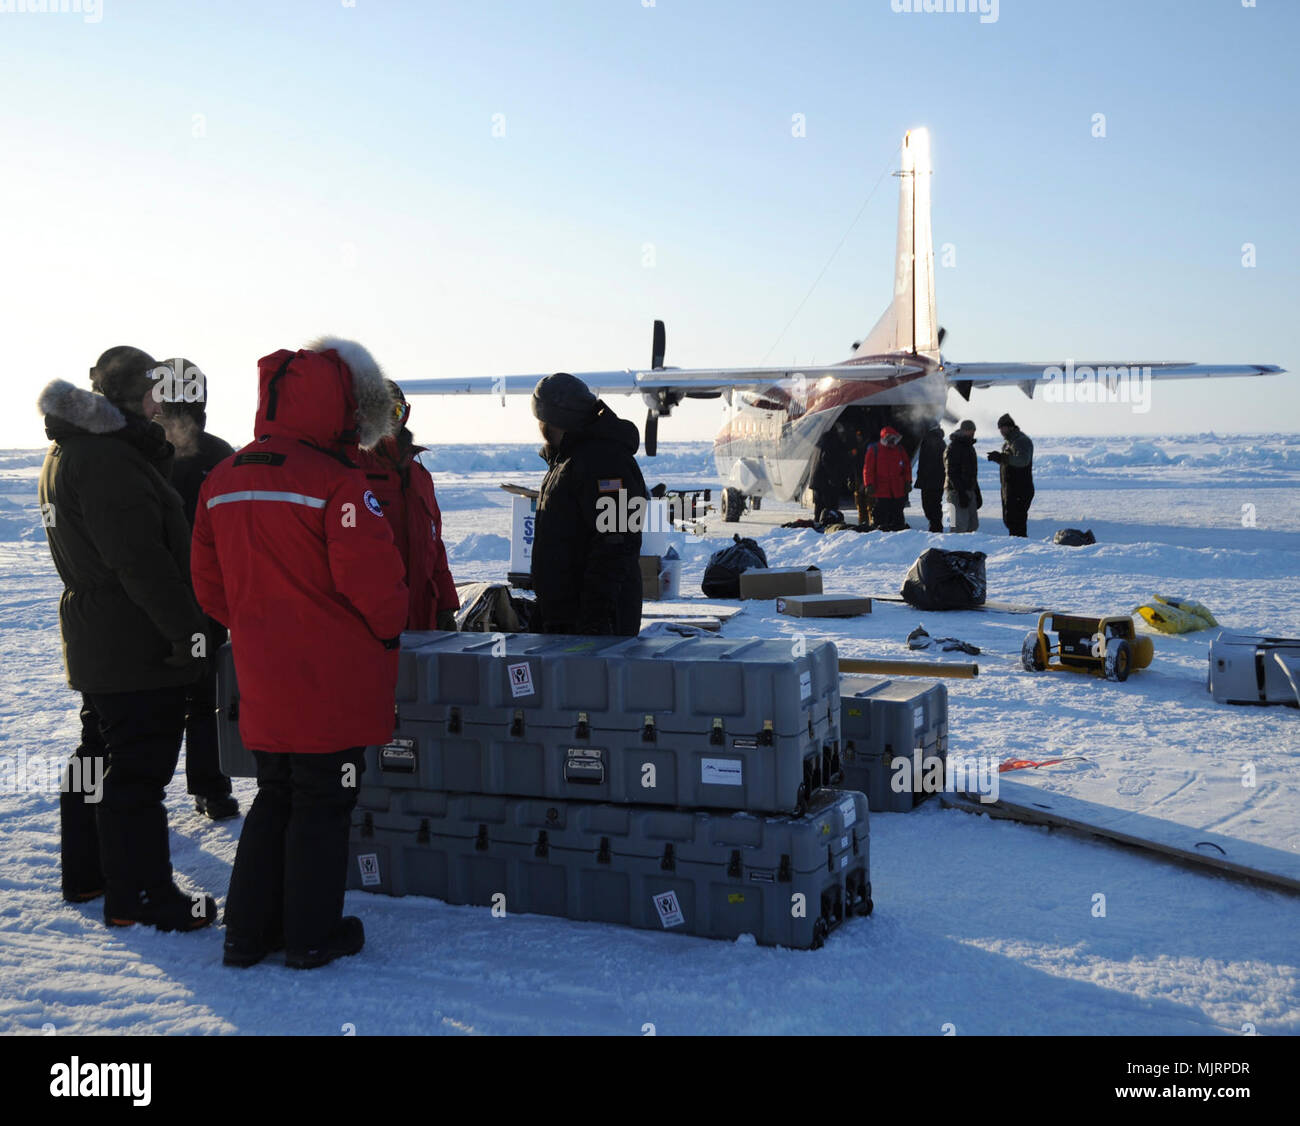 BEAUFORT SEA (March 21, 2018) Personnel at Ice Camp Skate load equipment onboard aircraft in preparation for camp breakdown during Ice Exercise (ICEX) 2018. ICEX 2018 is a five-week exercise that allows the Navy to assess its operational readiness in the Arctic, increase experience in the region, advance understanding of the Arctic environment, and continue to develop relationships with other services, allies and partner organizations. Armed Forces and civilians displaying courage bravery dedication commitment and sacrifice Stock Photo